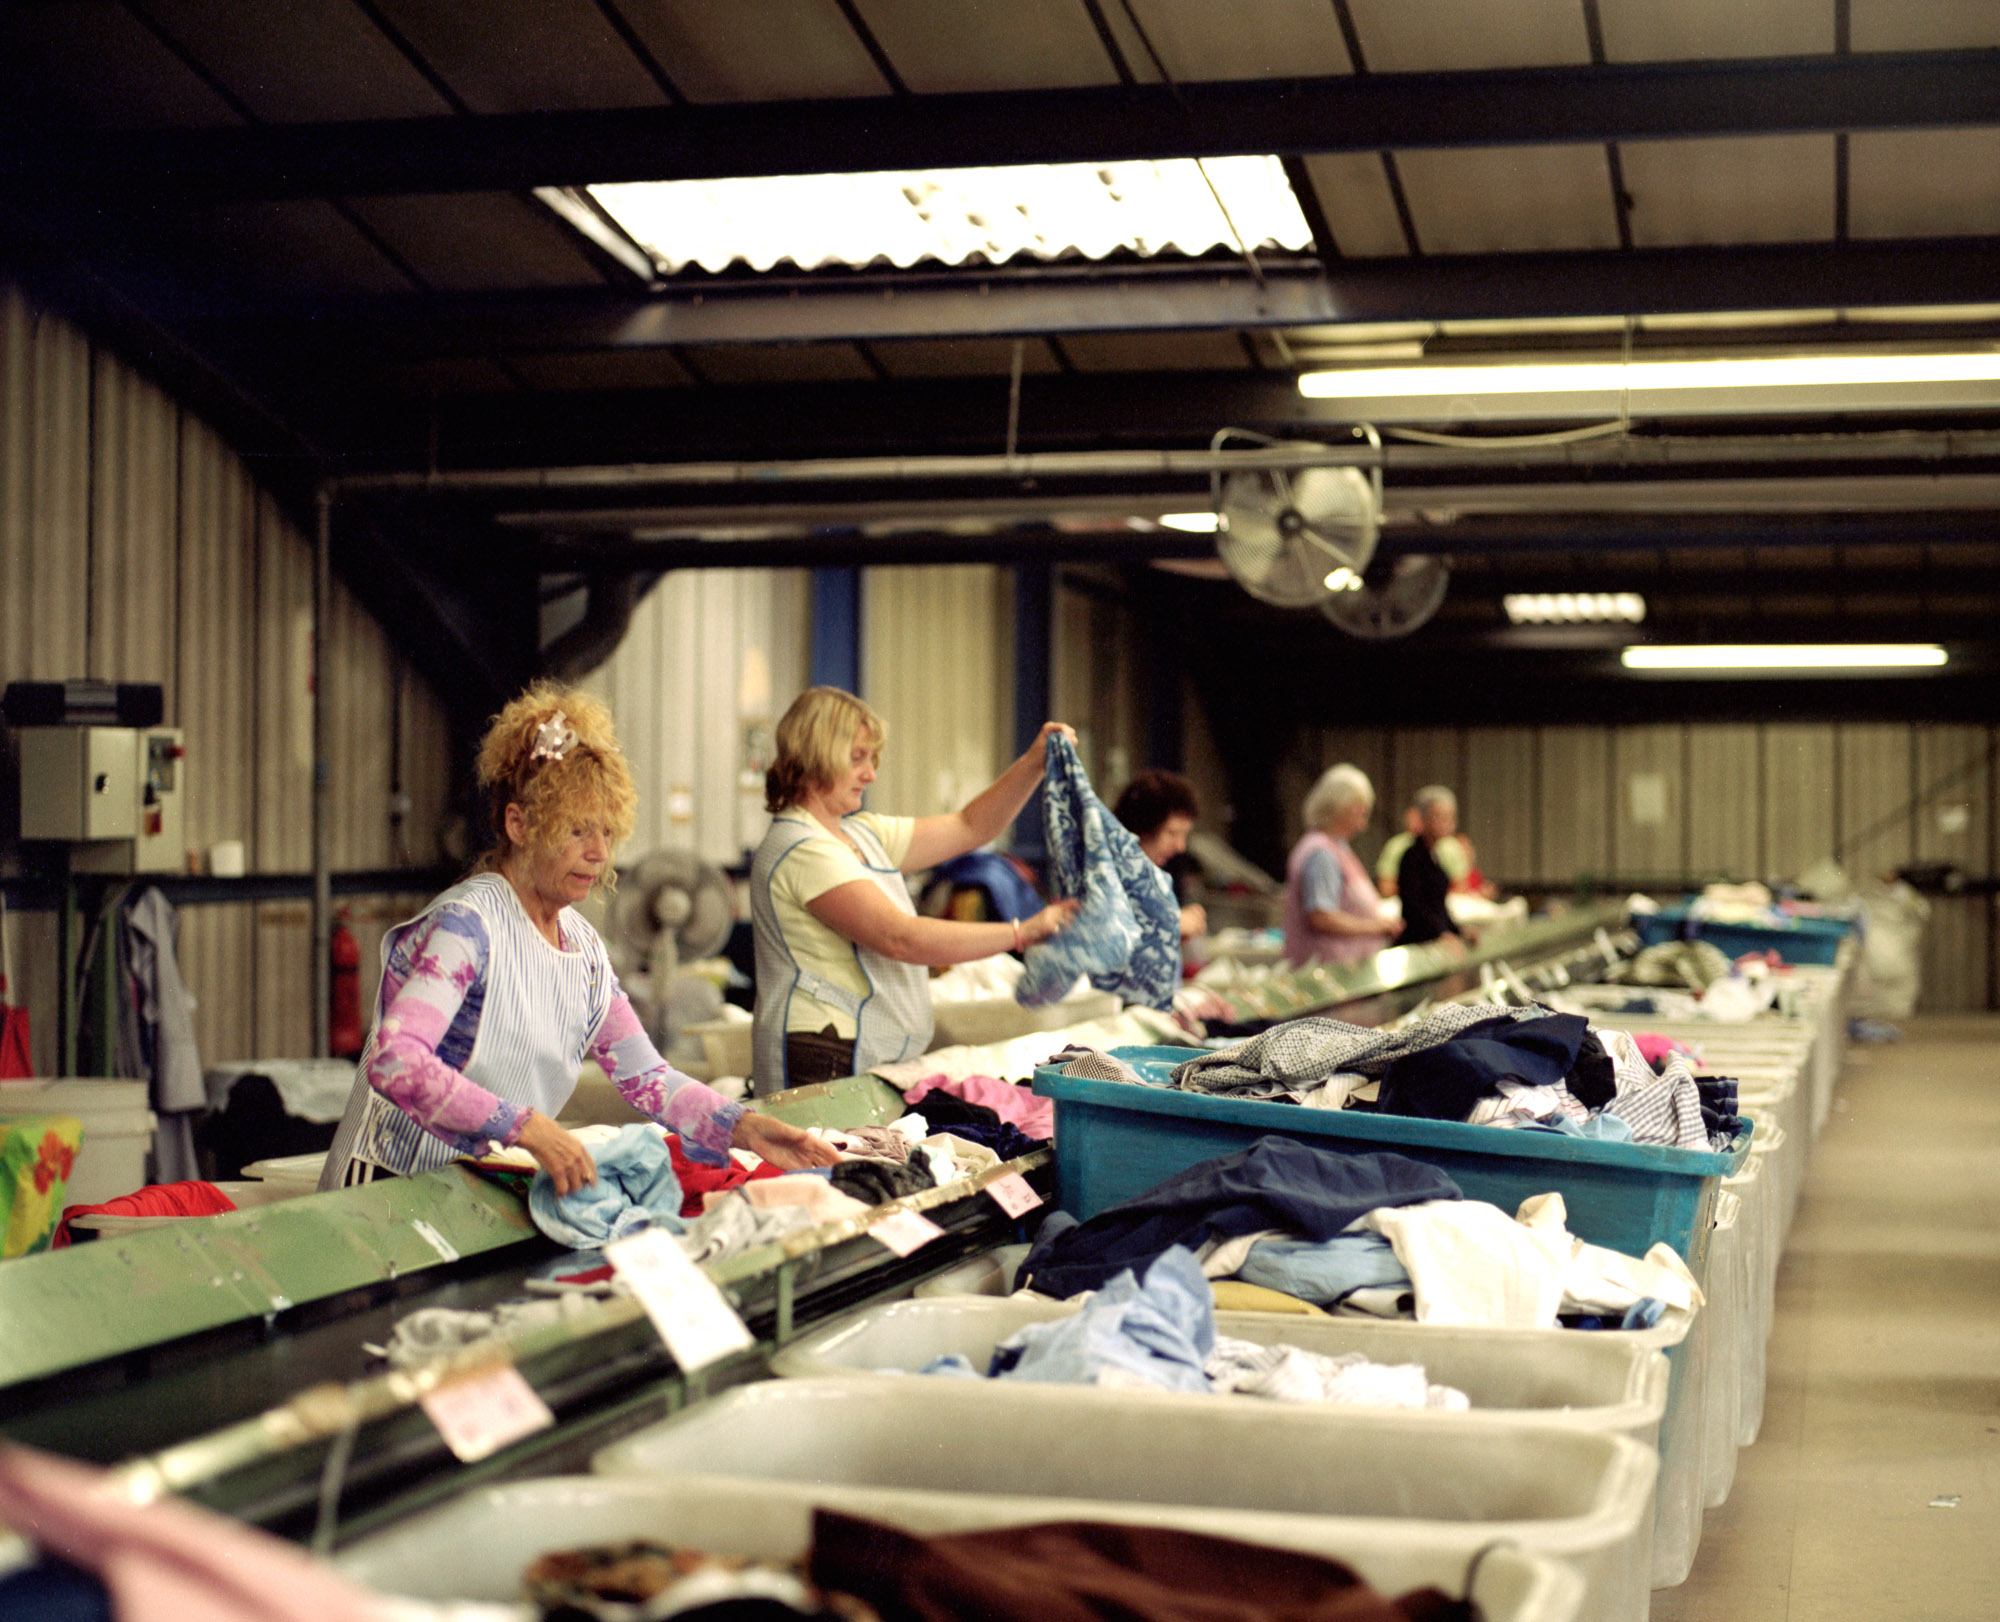  Over half a million tonnes of cast-offs are collected annually, of which only  about 20% is reused in the UK. Clothes are sorted and graded into categories  based on garment style, fabric, weight and colour depending on the current demands of the va